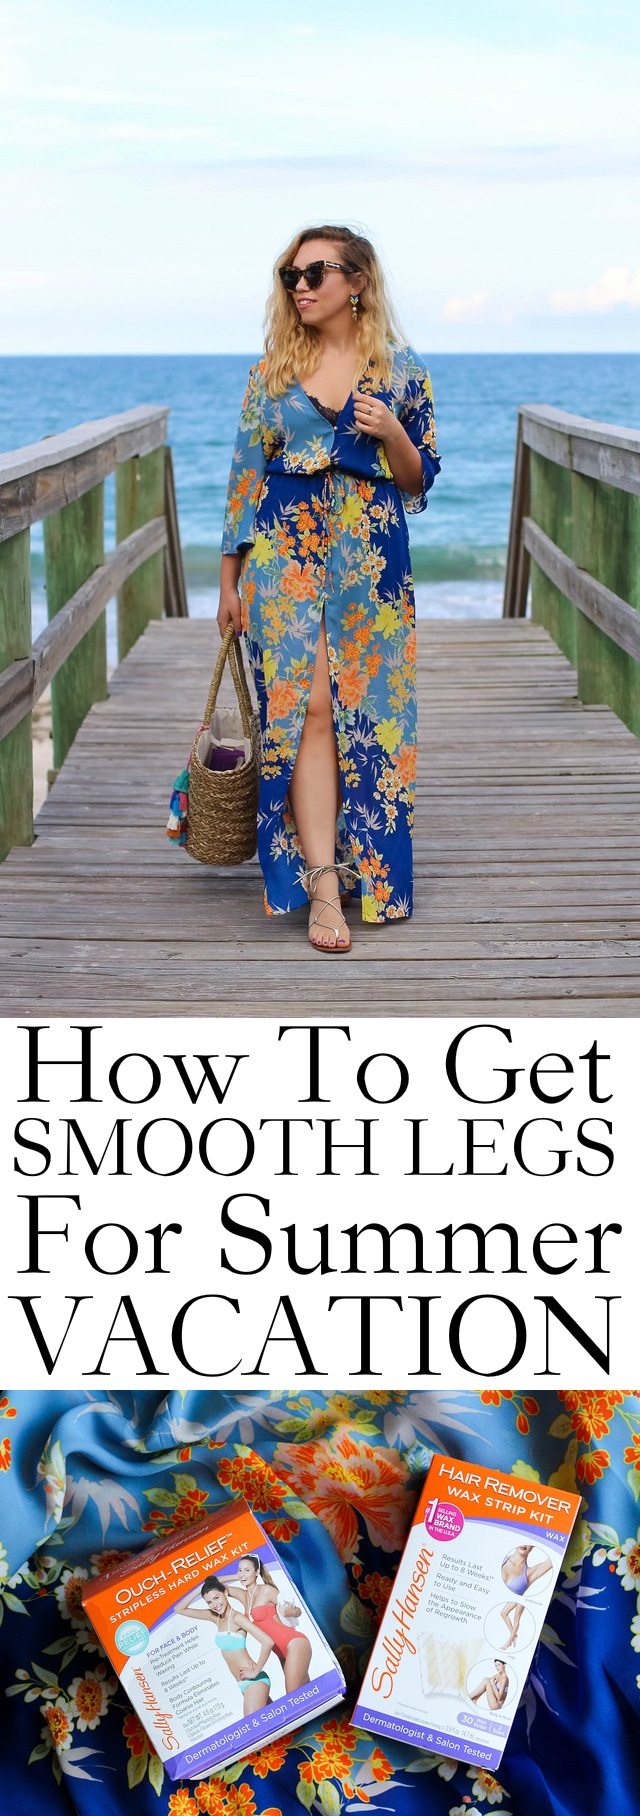 How to Get Smooth Legs for Summer Vacation with Sally Hansen | Sally Hansen Wax Strips | Guess Blue Floral Maxi Duster Dress | Steve Madden Lace Up Gold Sandals | Straw Tote Bag | Summer Vacation Outfit | Travel Style Inspiration | Vero Beach Florida | Li